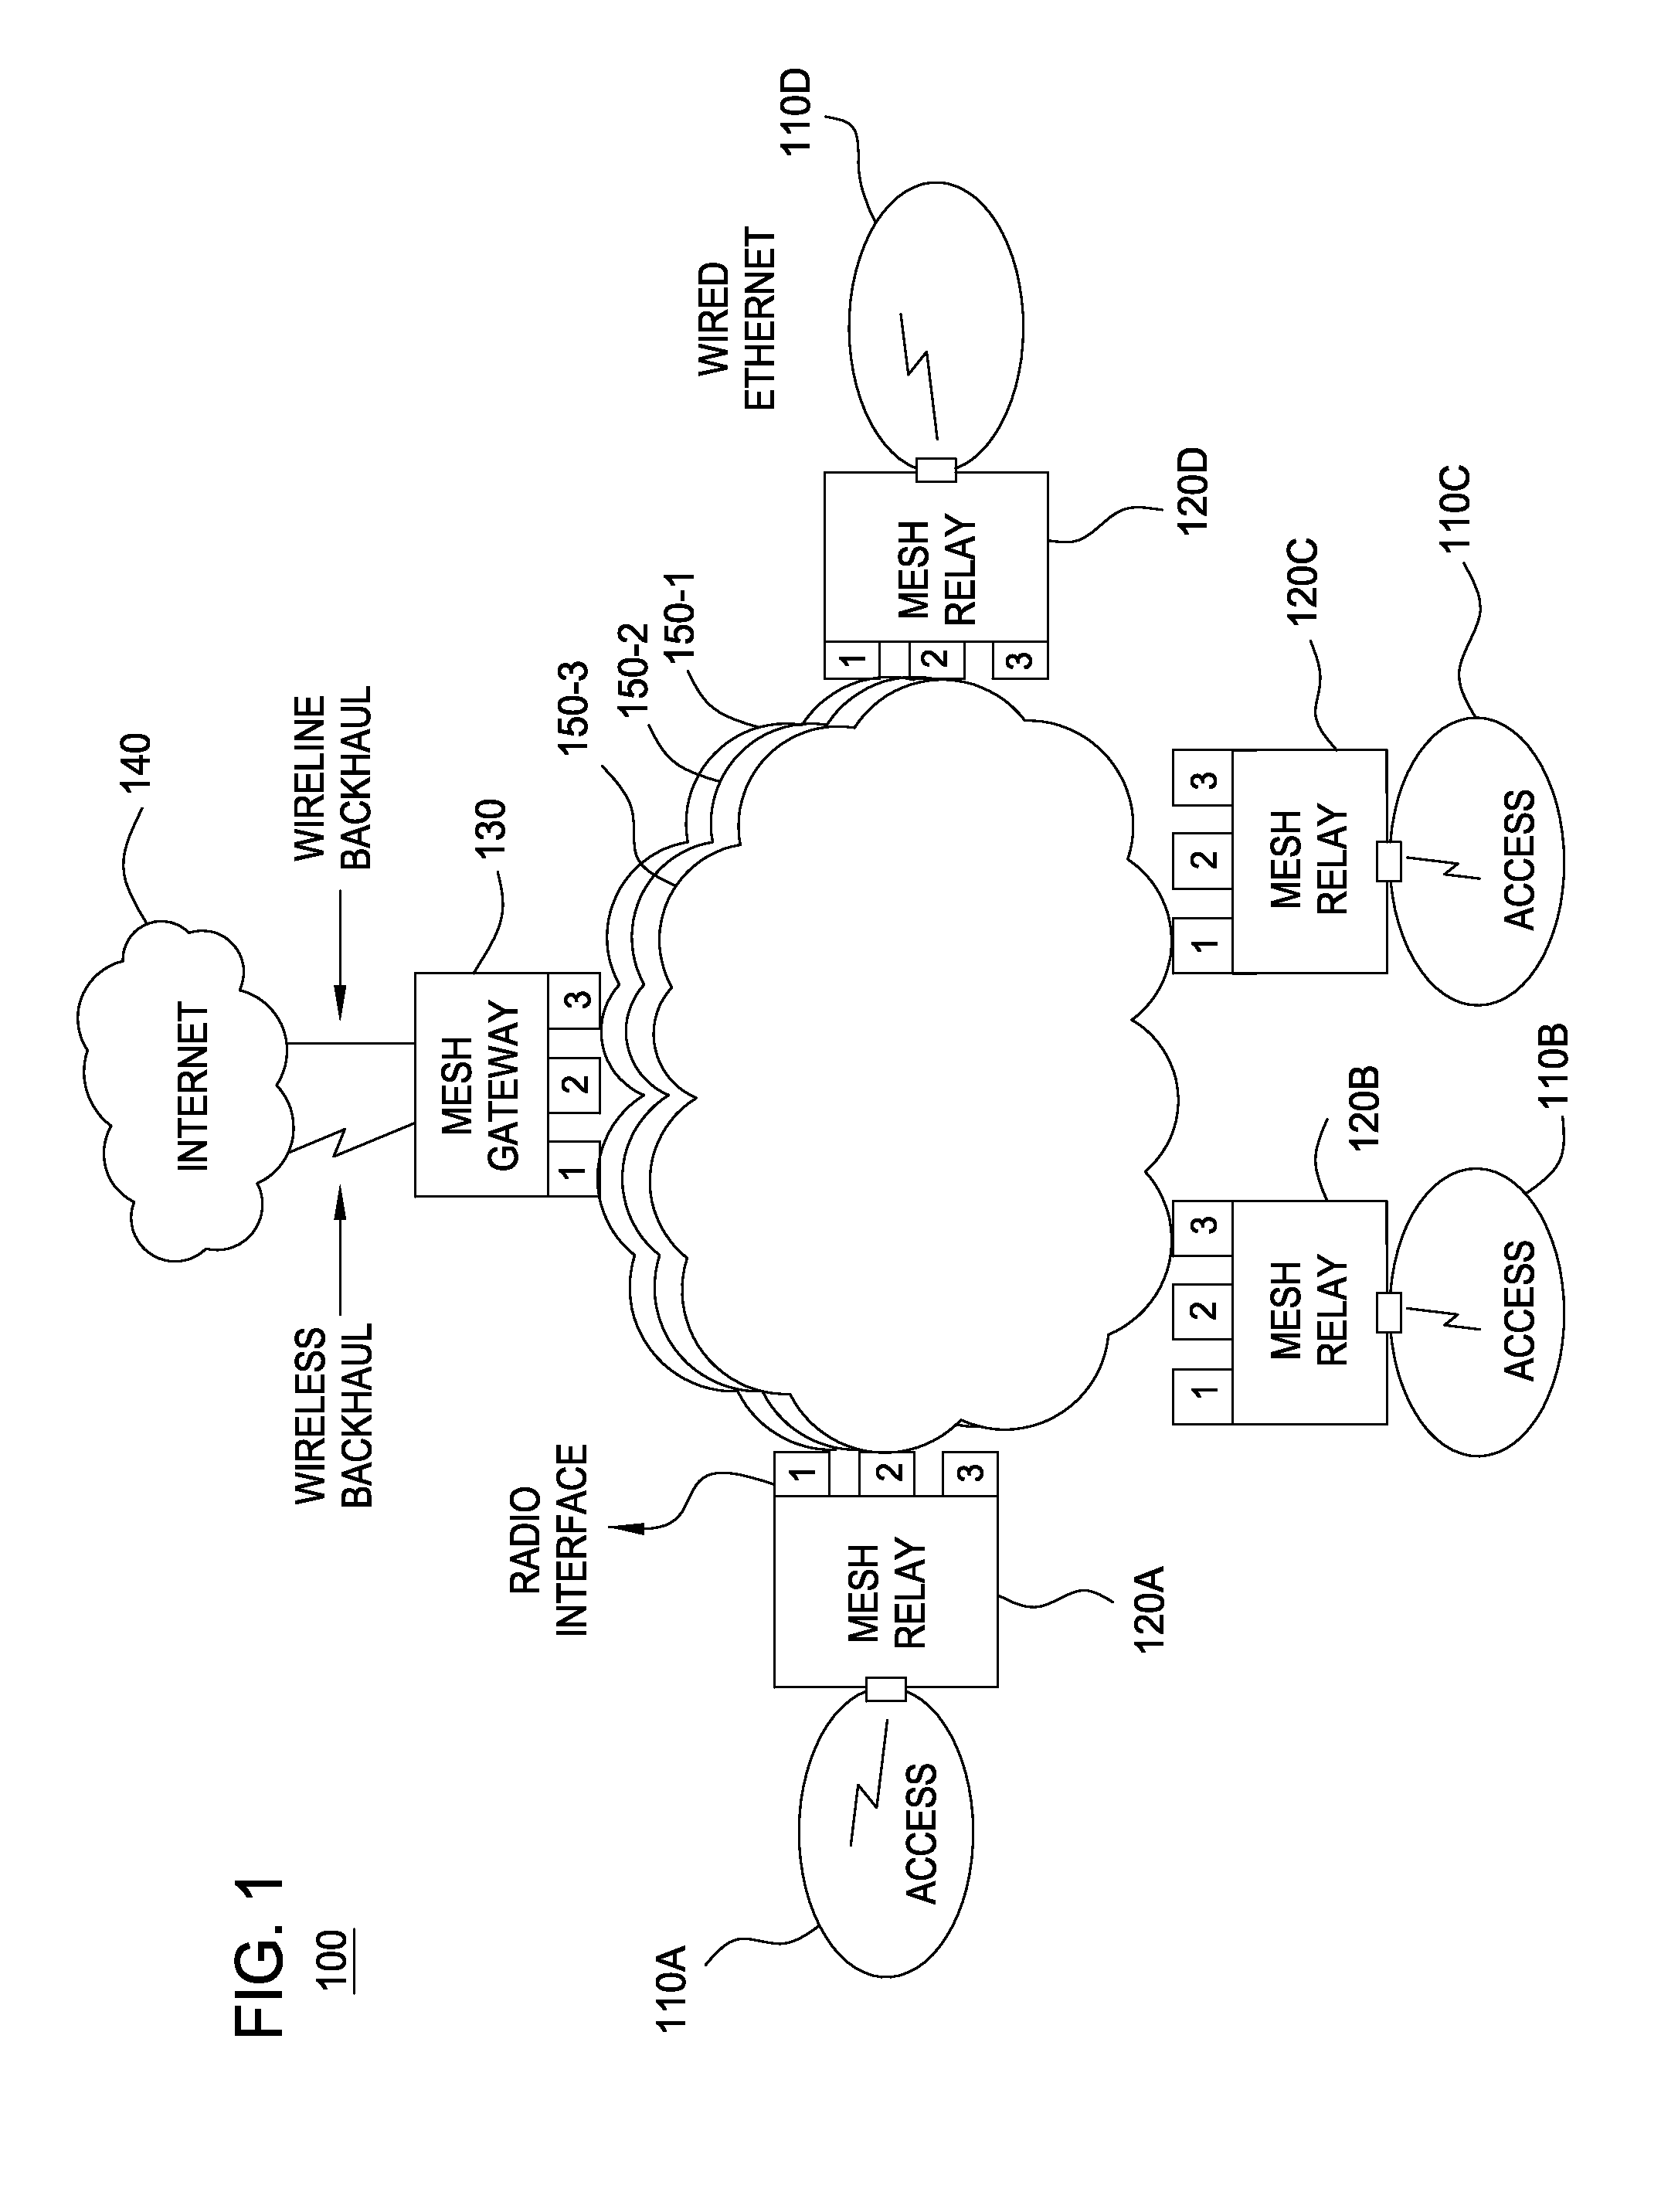 Interference aware routing in multi-radio wireless mesh networks